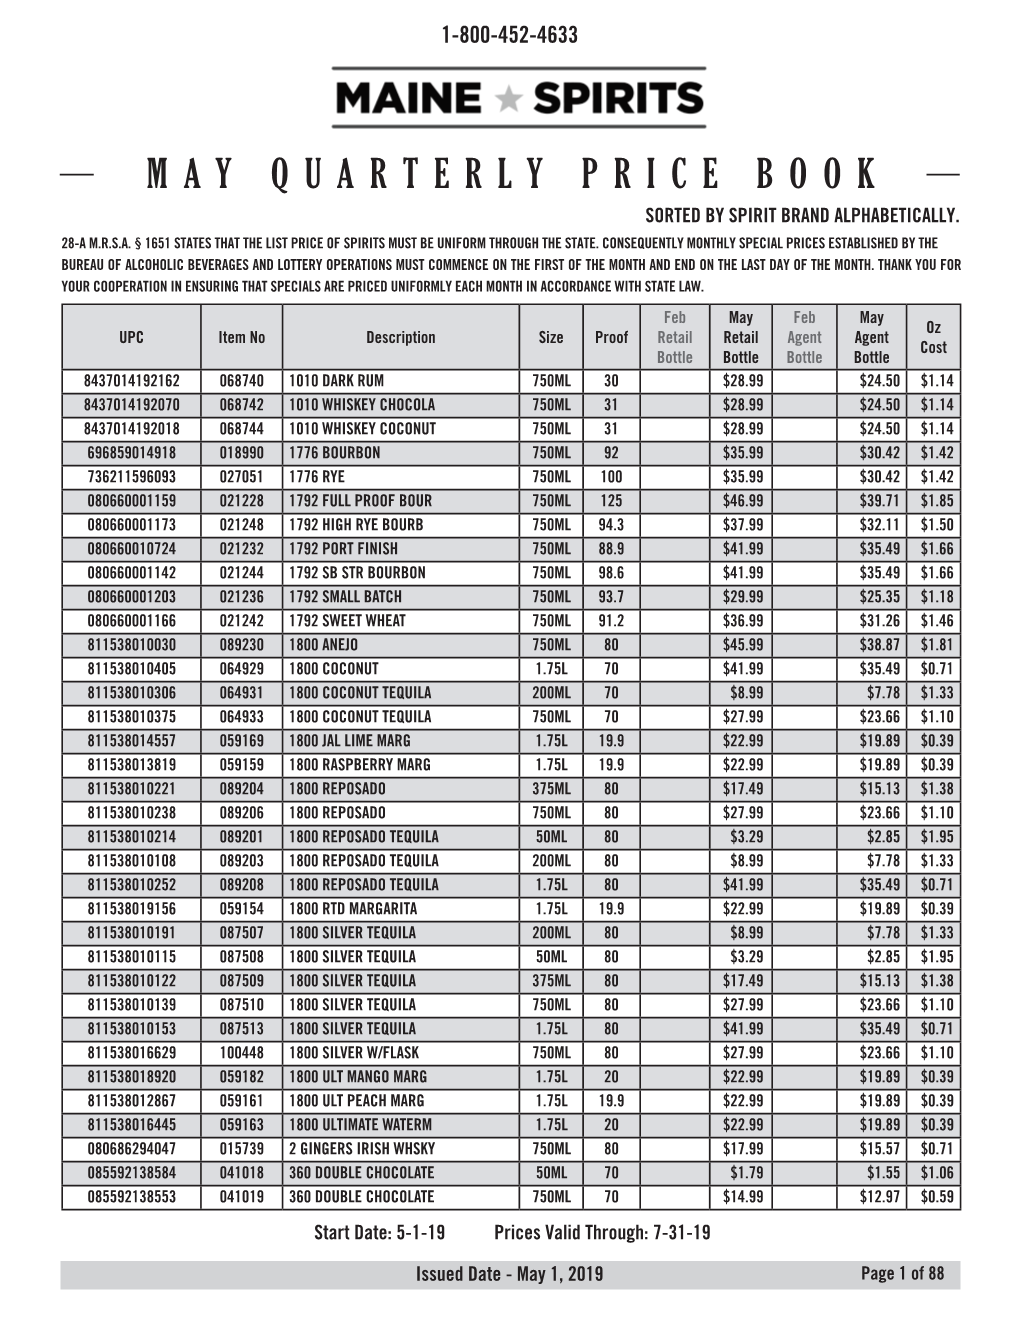 May Quarterly Price Book Sorted by Spirit Brand Alphabetically